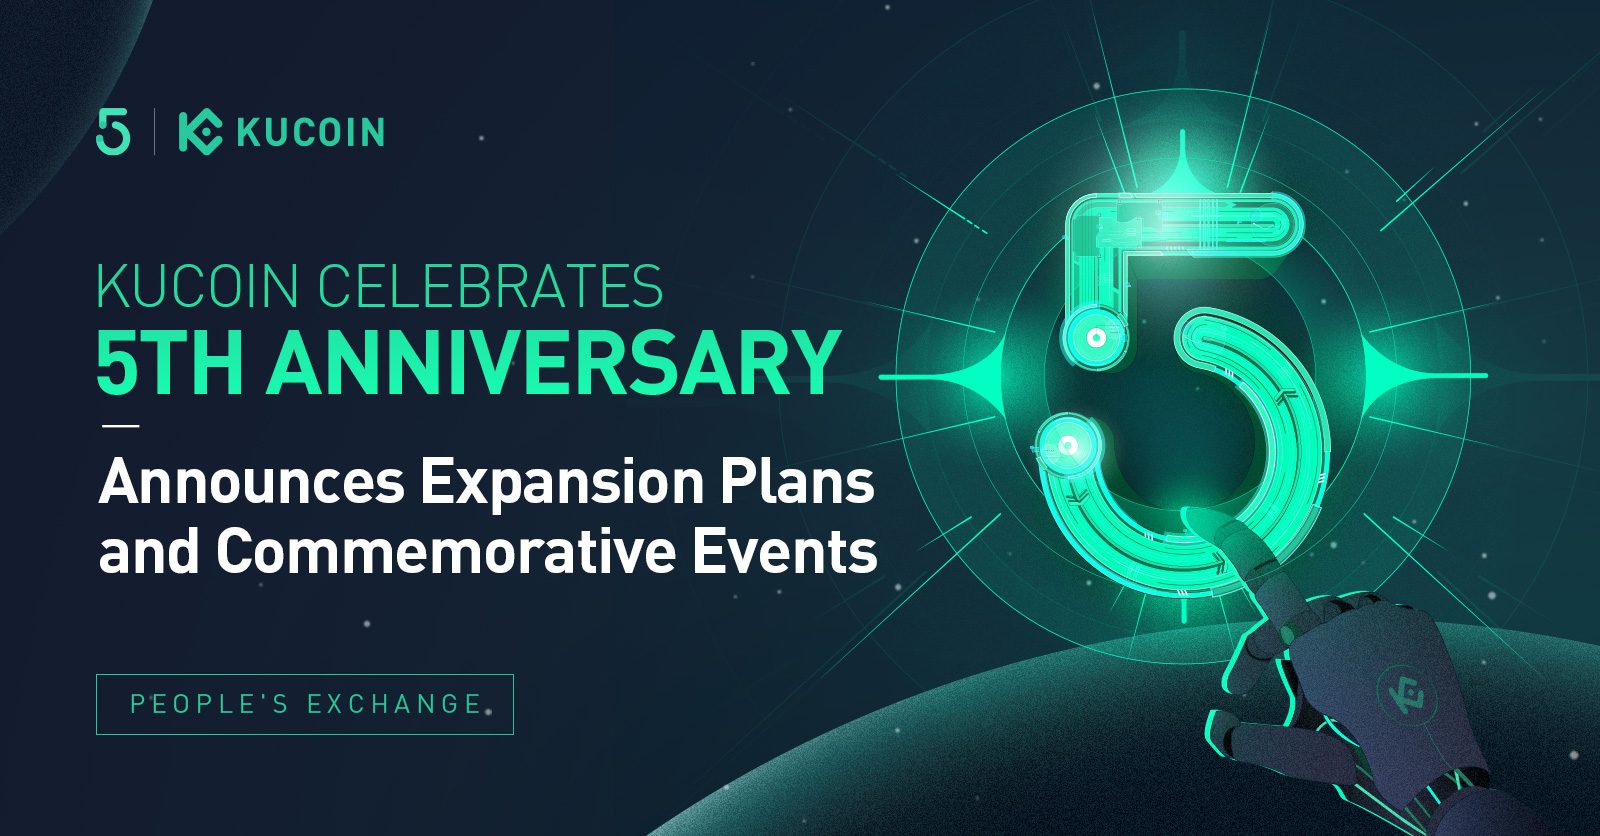 KuCoin celebrates 5th anniversary, announces expansion plans and Commemorative events 